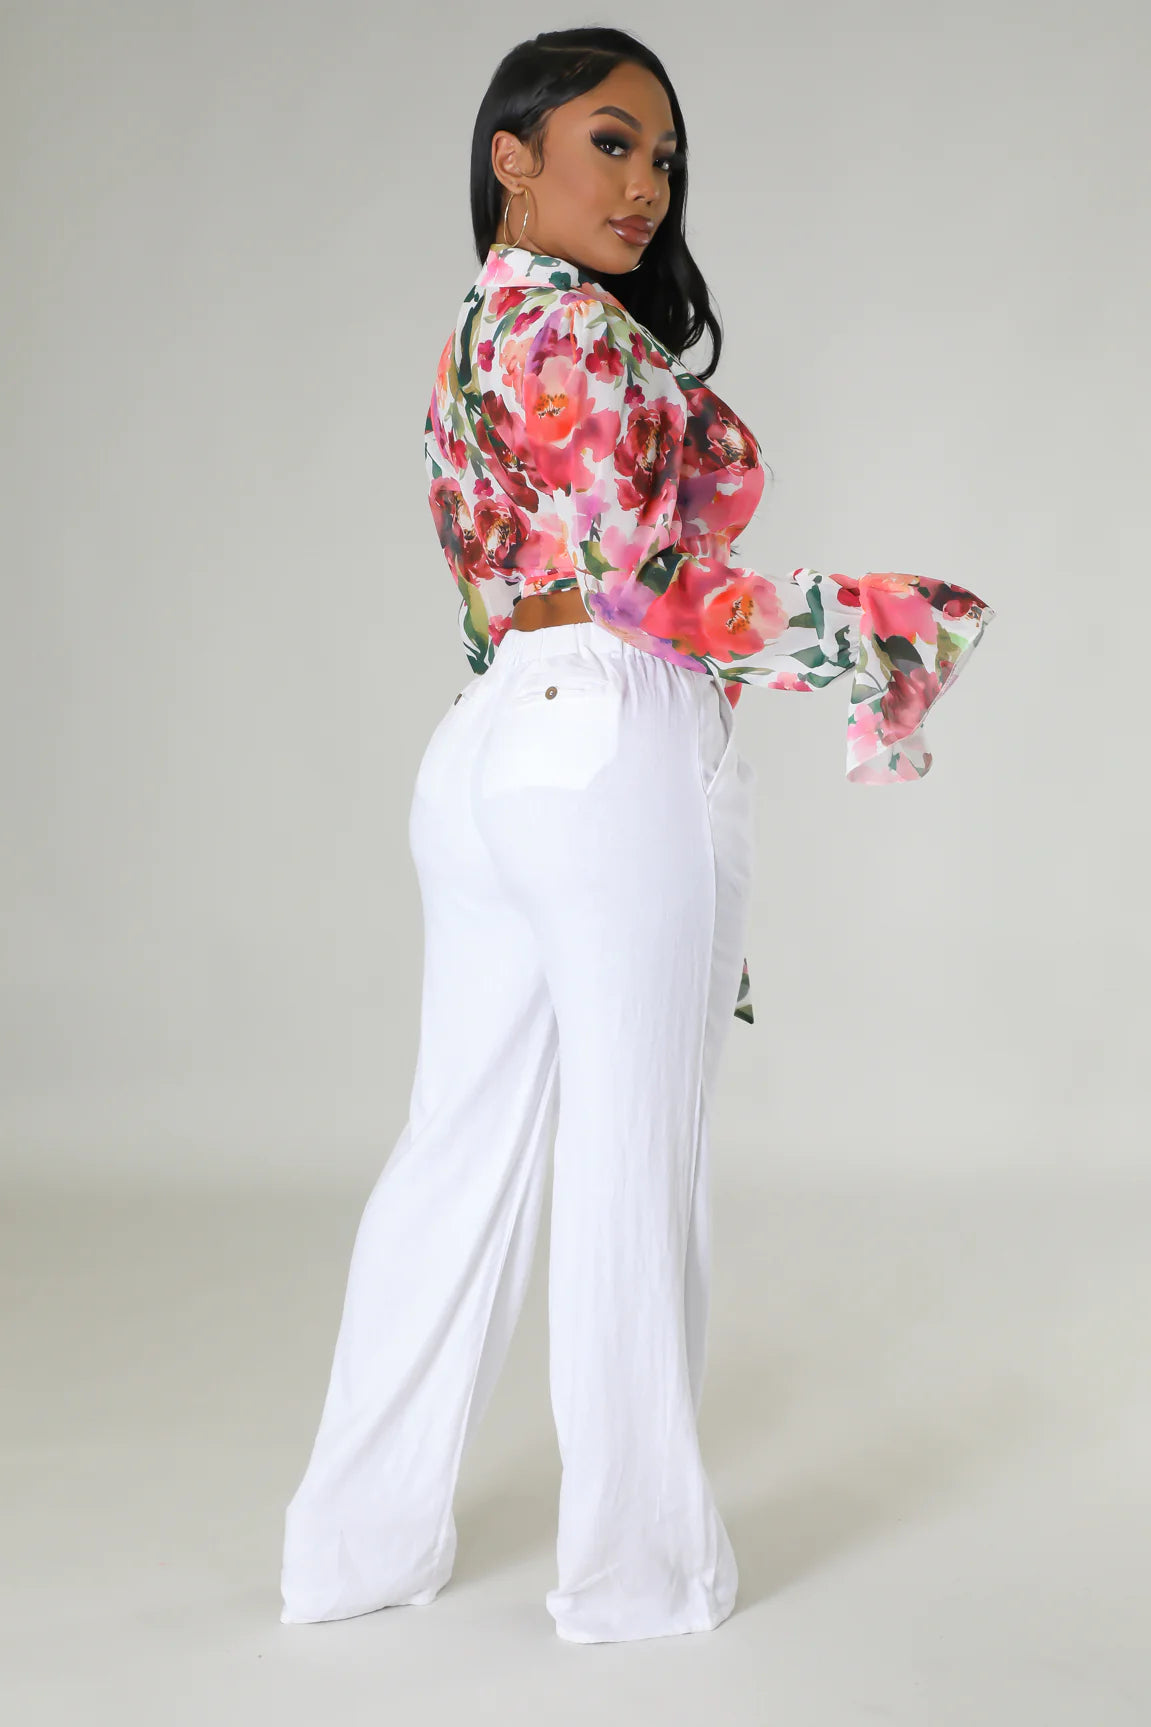 Blossom into spring Flower wrap top (Also Available in Plus)